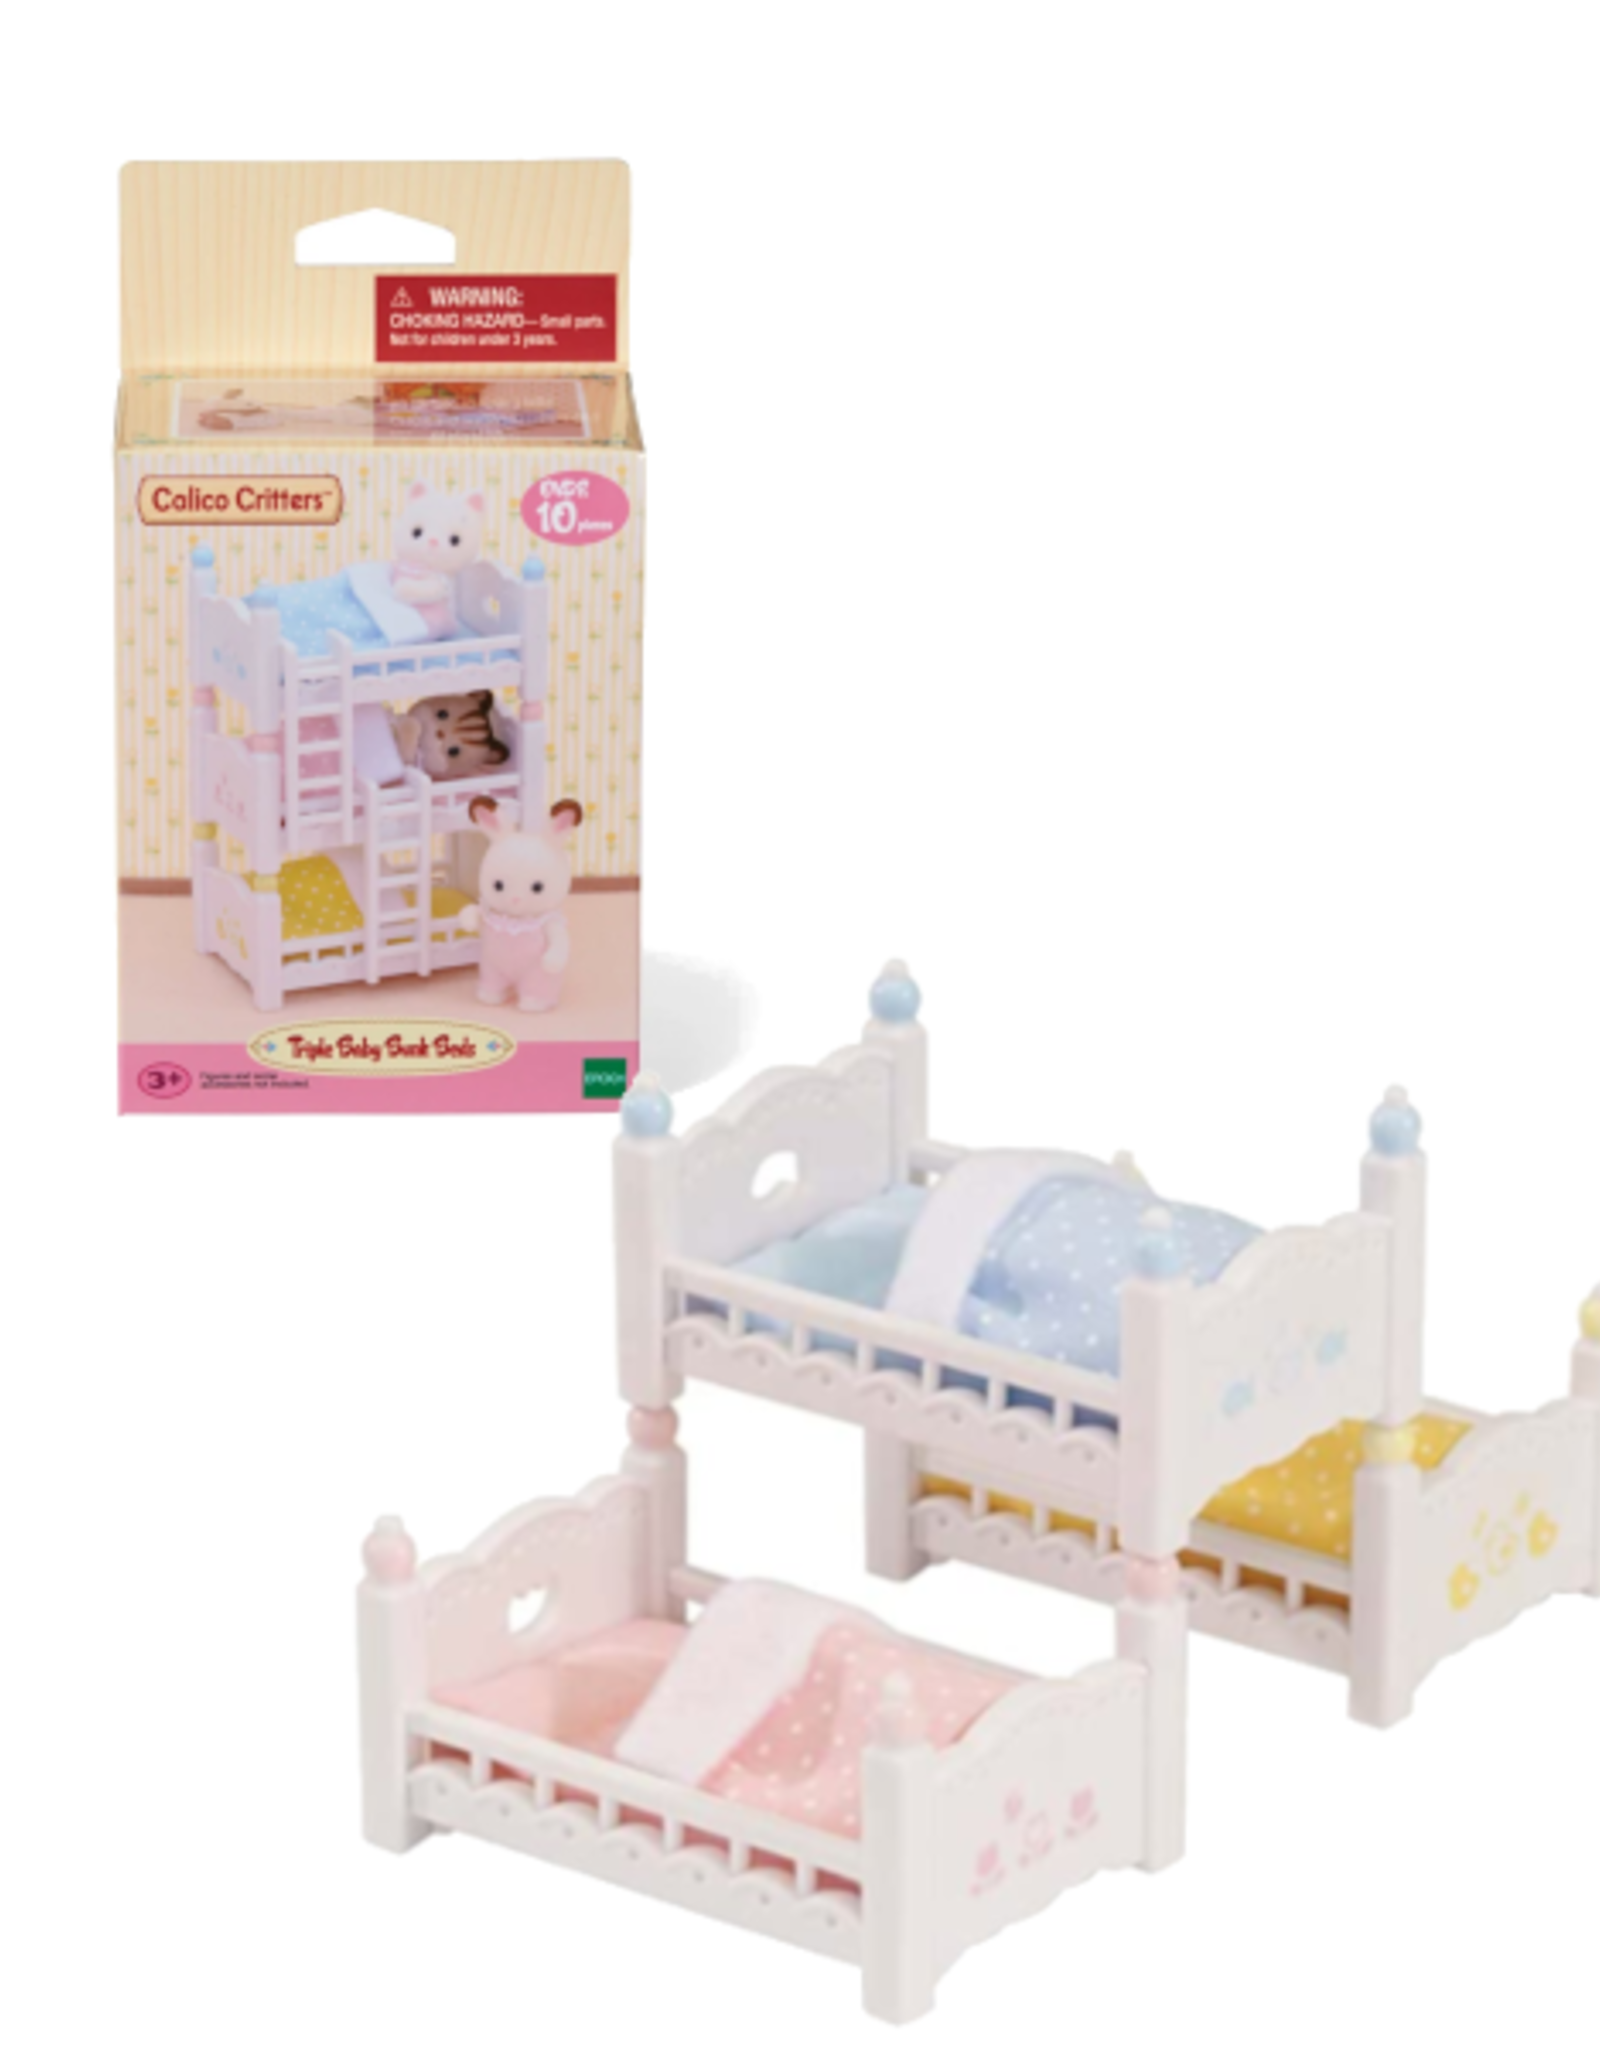 Calico Critters Triple Baby Bunk Beds, Calico Critters Bunk Beds